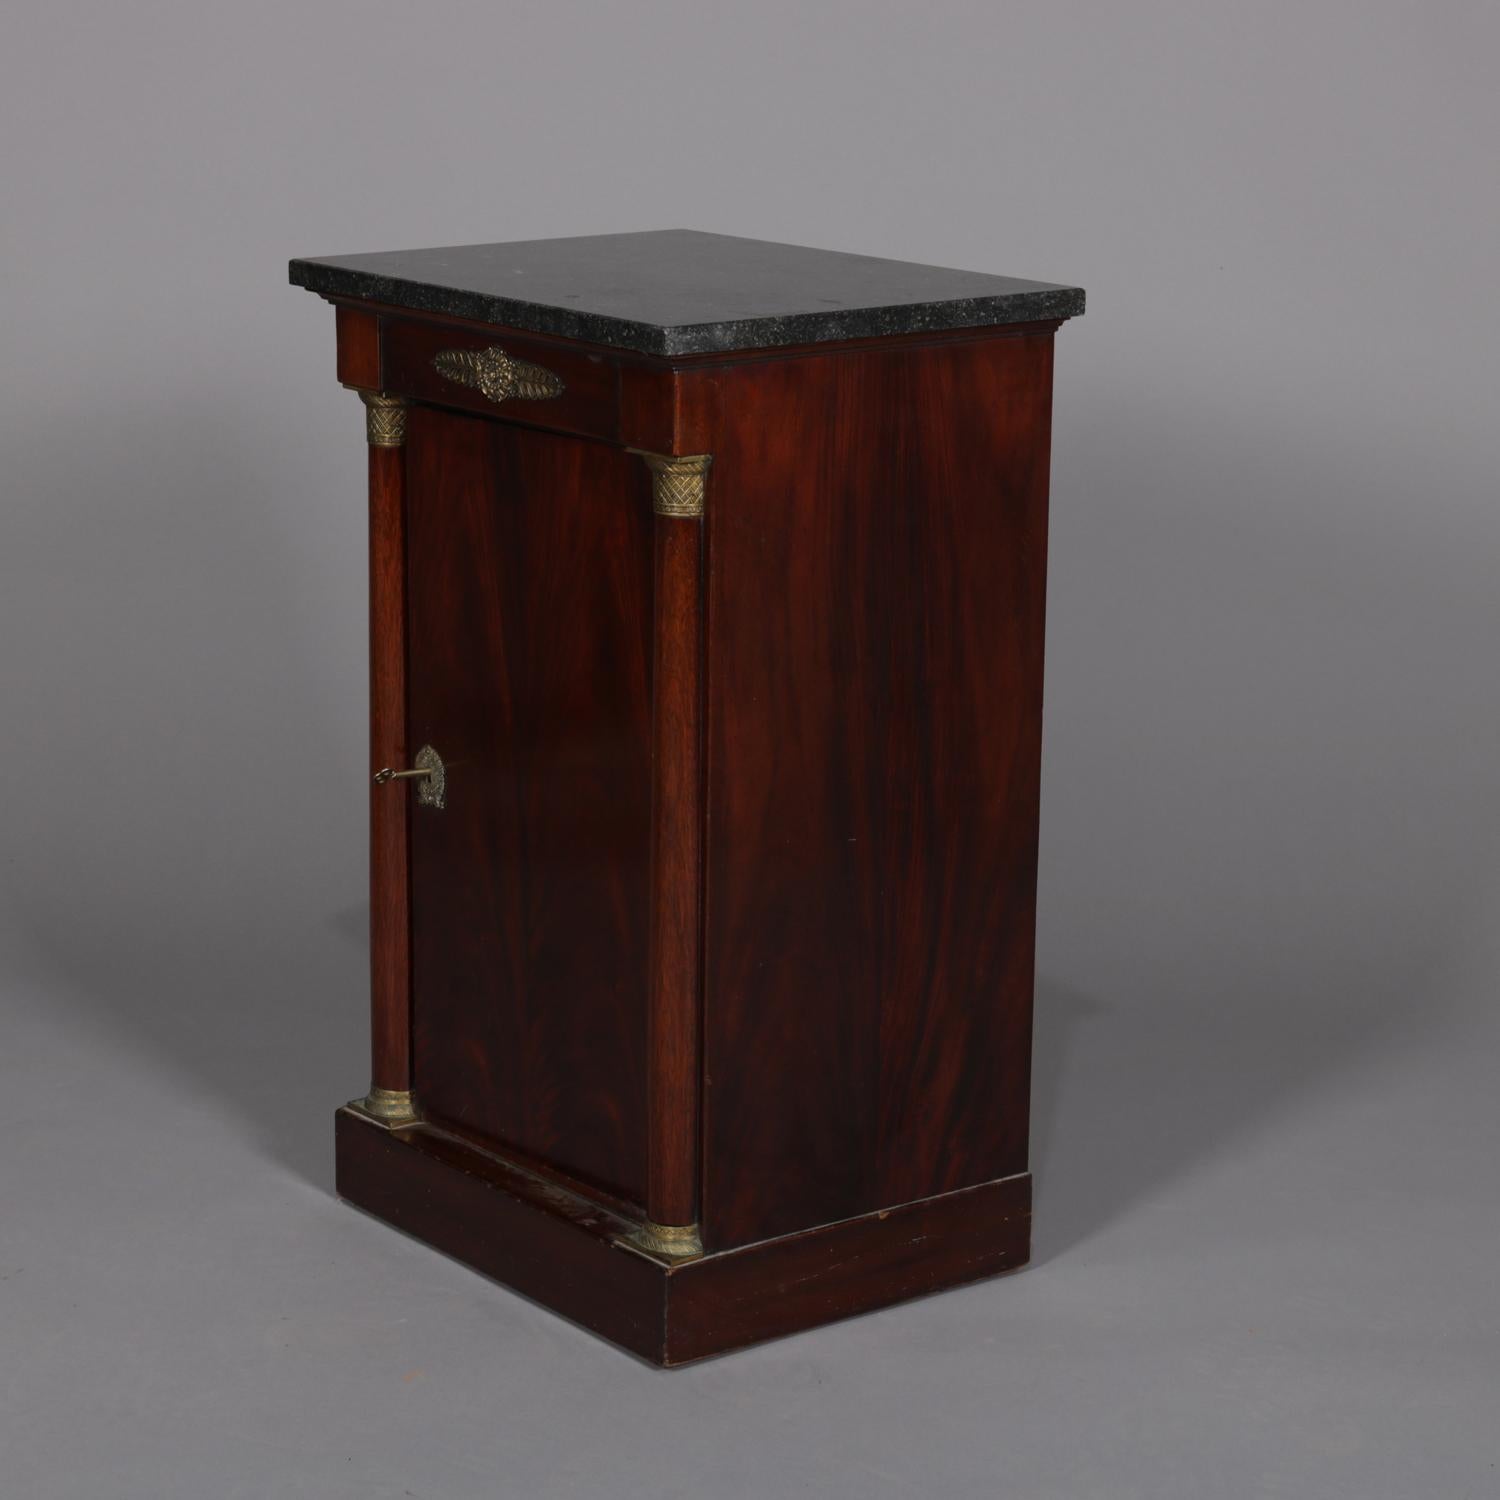 An antique French Empire side cabinet features marble top surmounting single door mahogany case having flanking Corinthian column supports, cast bronze attachments throughout, locking and with key, case interior open and without shelving, circa